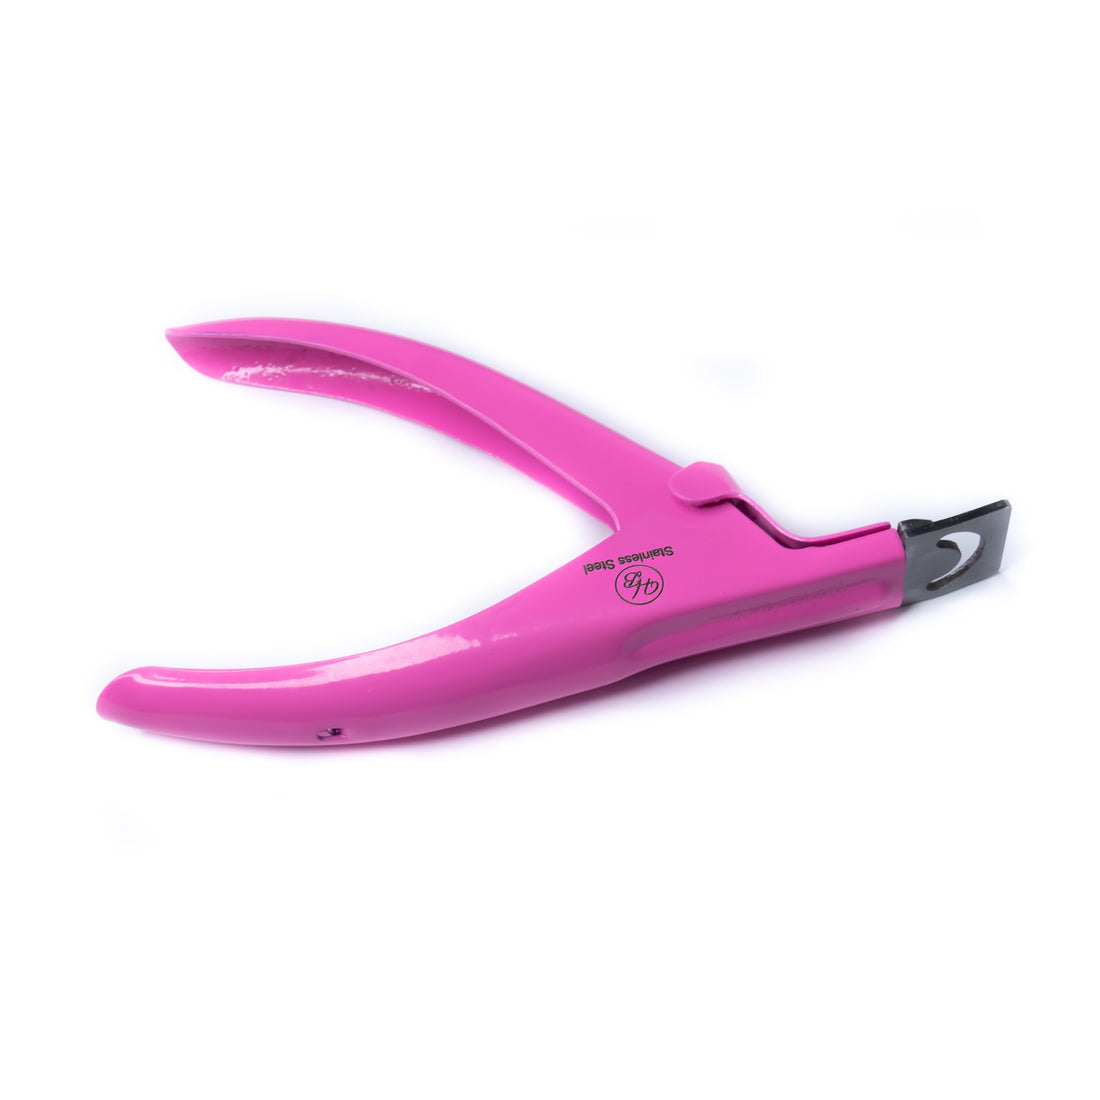 Professional Edge Cutter | Stainless Steel | Ultra Sharp | For Nails | High Quality | Hey Beautiful 